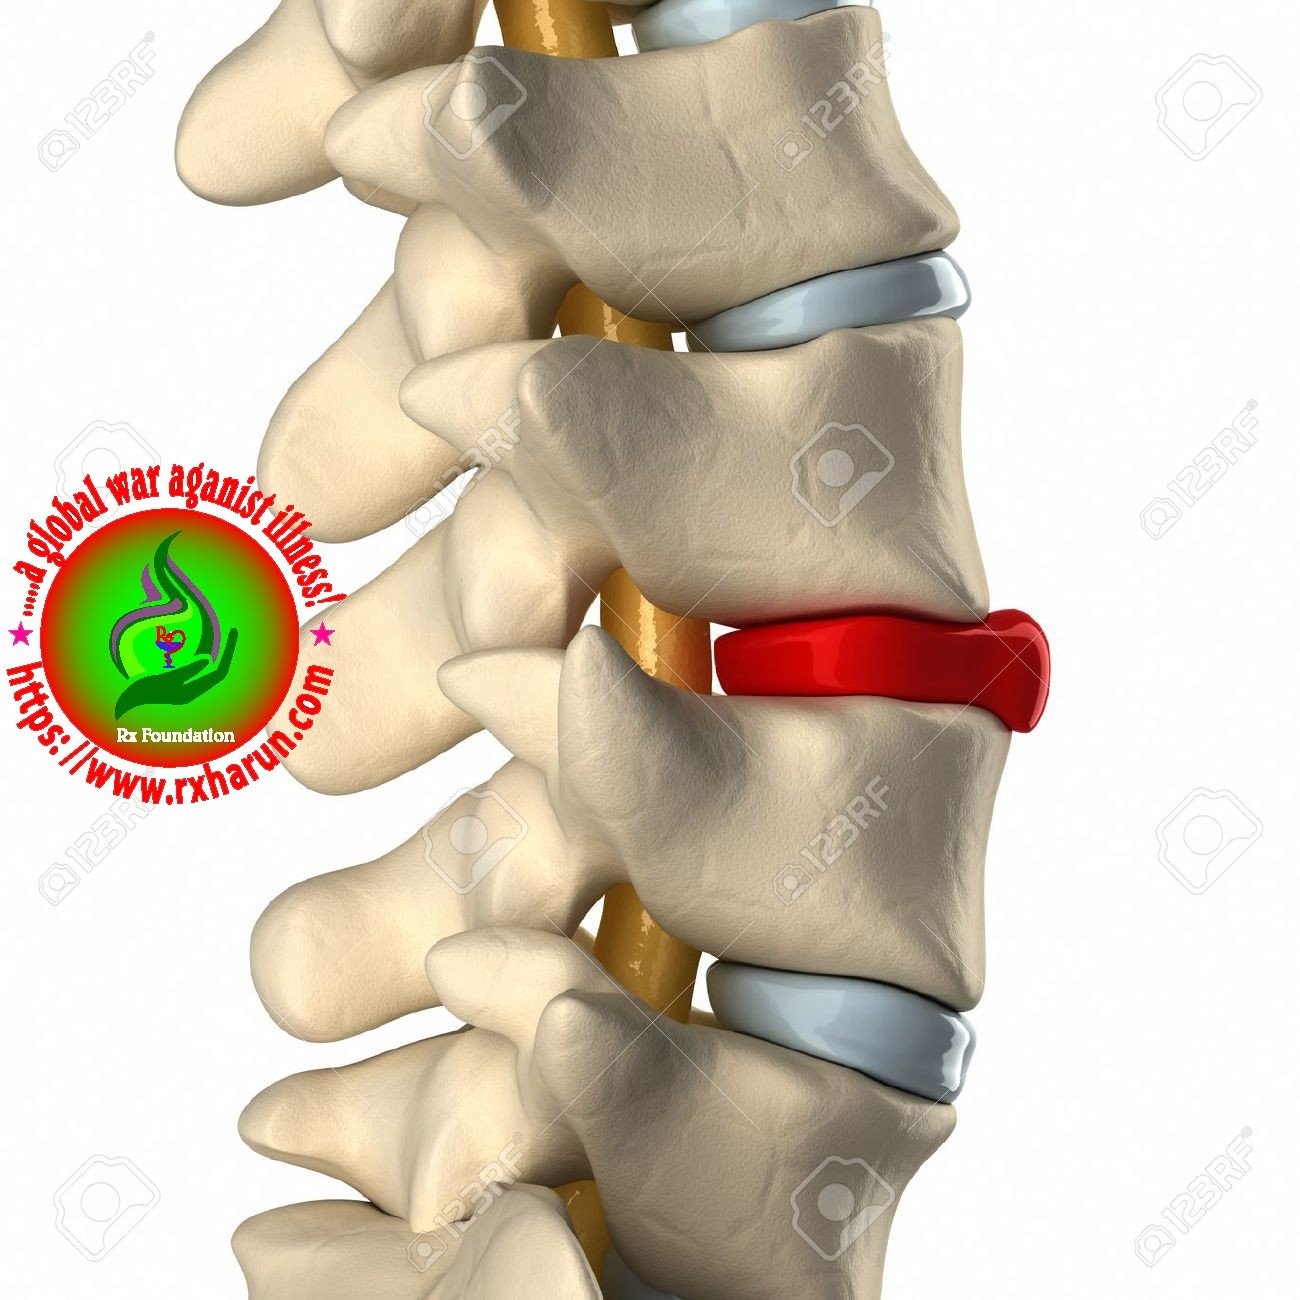 C4 and C5 Disc Herniation